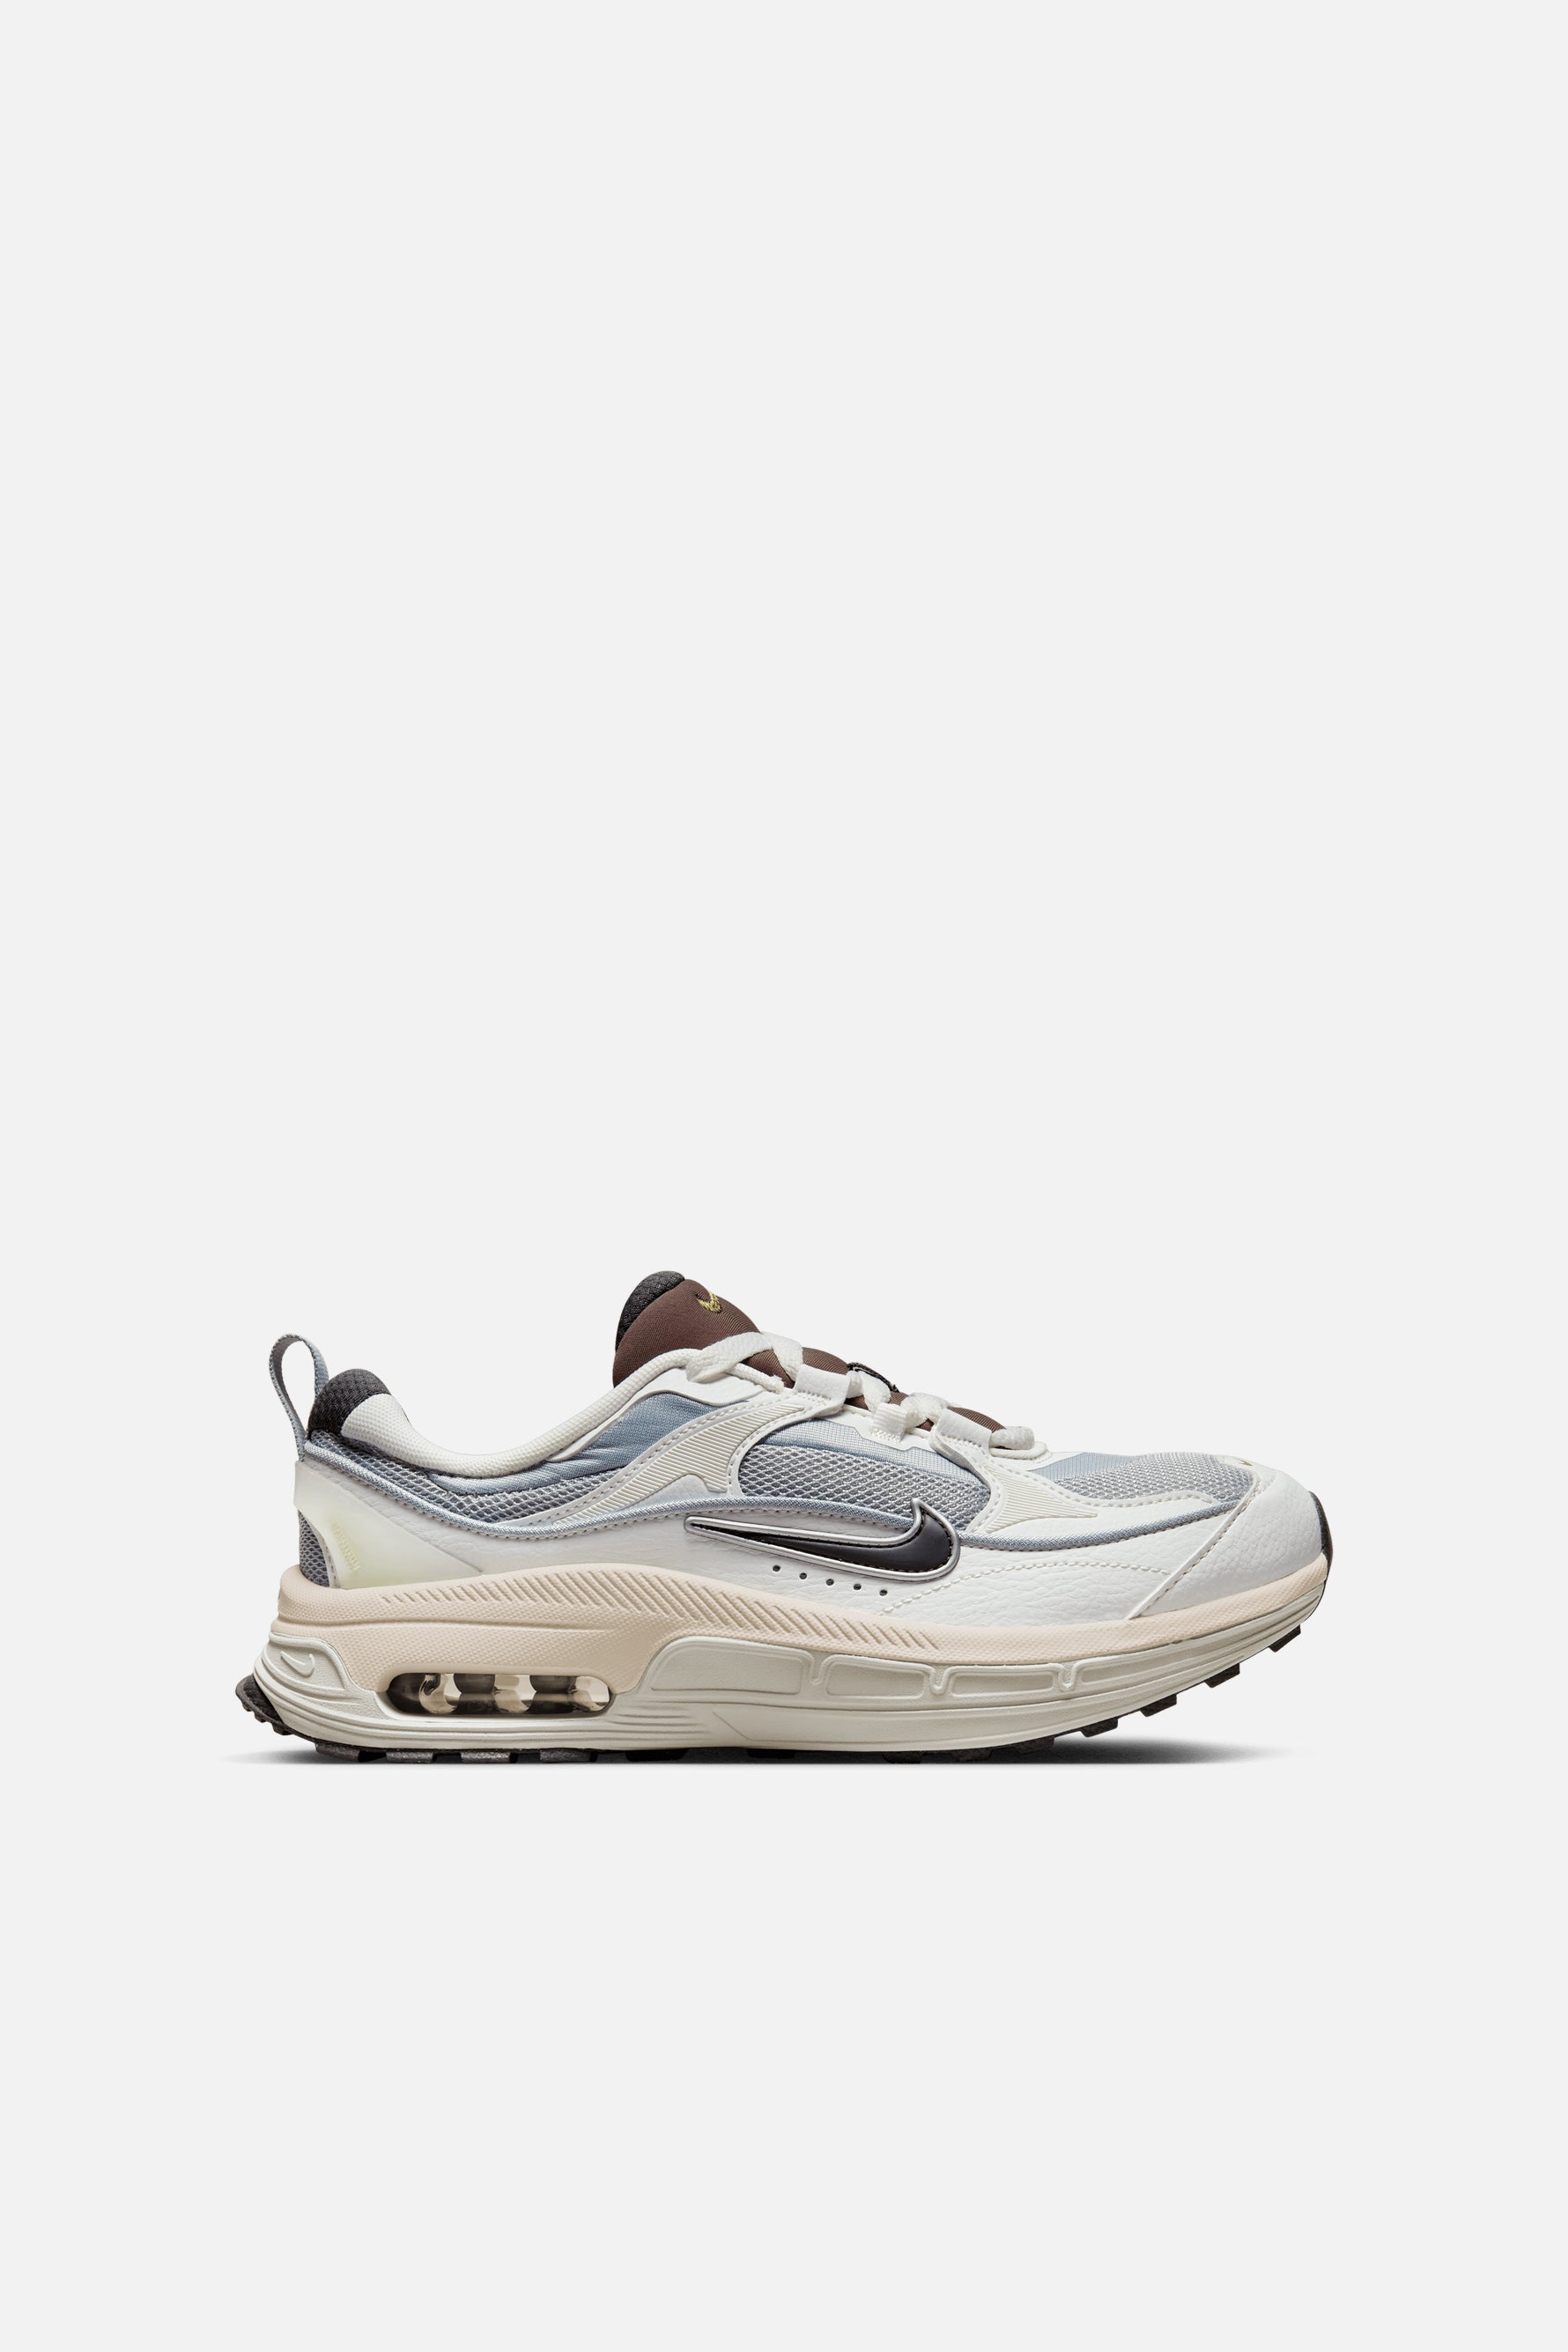 Nike Air Max Bliss LX Women's Shoes.